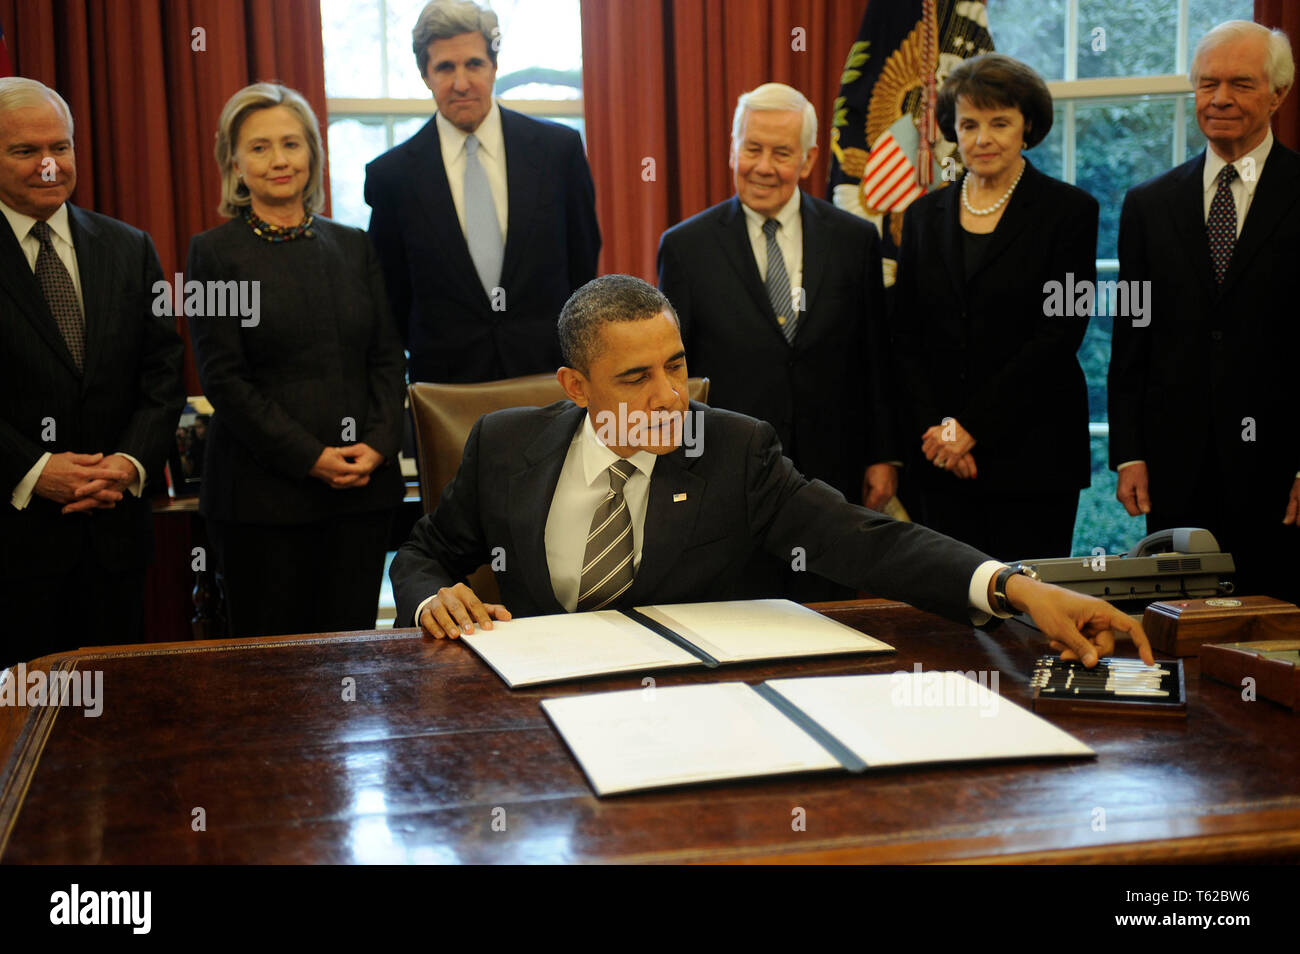 ***FILE PHOTO*** Former Senator Richard Lugar Has Passed Away. United States President Barack Obama signs the New START Treaty during a ceremony in the Oval Office of the White House, with, from left, U.S. Secretary of Defense Robert Gates, U.S. Secretary of State Hillary Rodham Clinton, U.S. Senator John Kerry (Democrat of Massachusetts), U.S. Senator Richard Lugar (Republican of Indiana), U.S. Senator Dianne Feinstein (Democrat of California), U.S. Senator Thad Cochran (Republican of Mississippi. Credit: Leslie E. Kossoff/Pool via CNP /MediaPunch Stock Photo